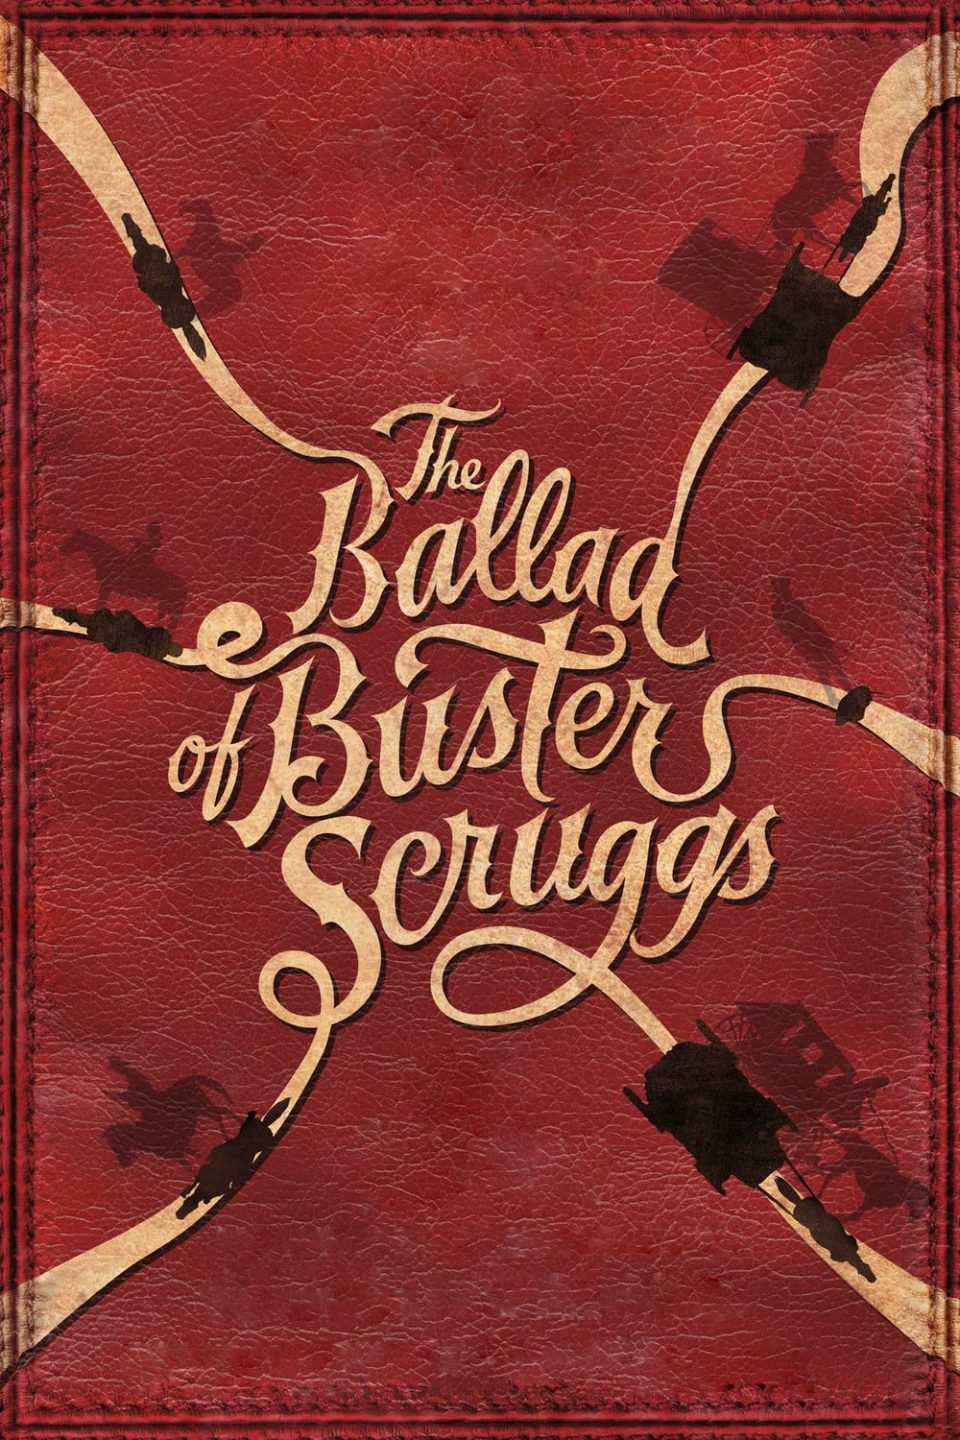 Poster for the movie "The Ballad of Buster Scruggs"